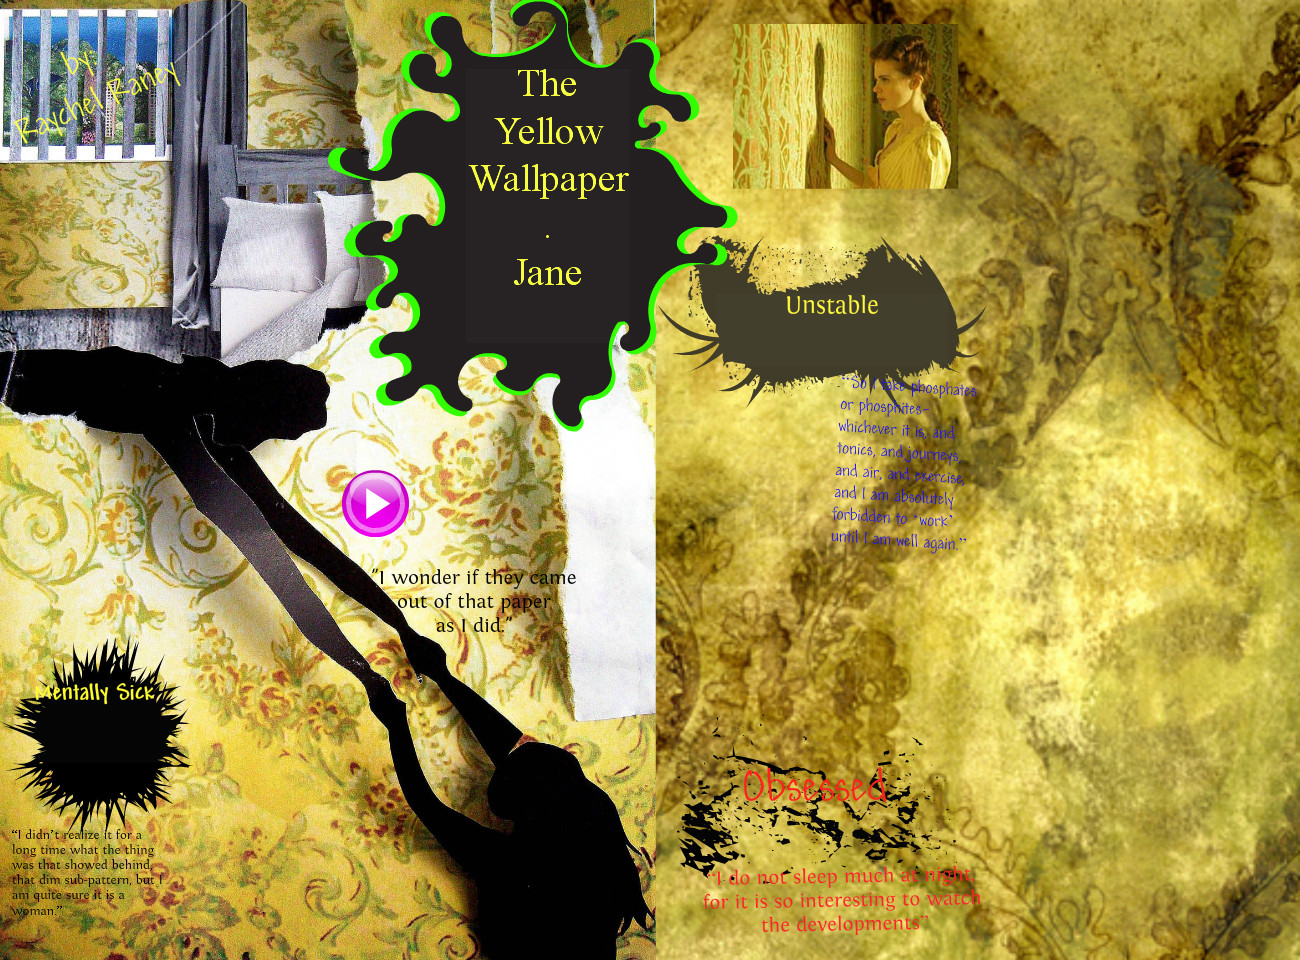 the yellow wallpaper sparknotes read the wallpaper genre epub